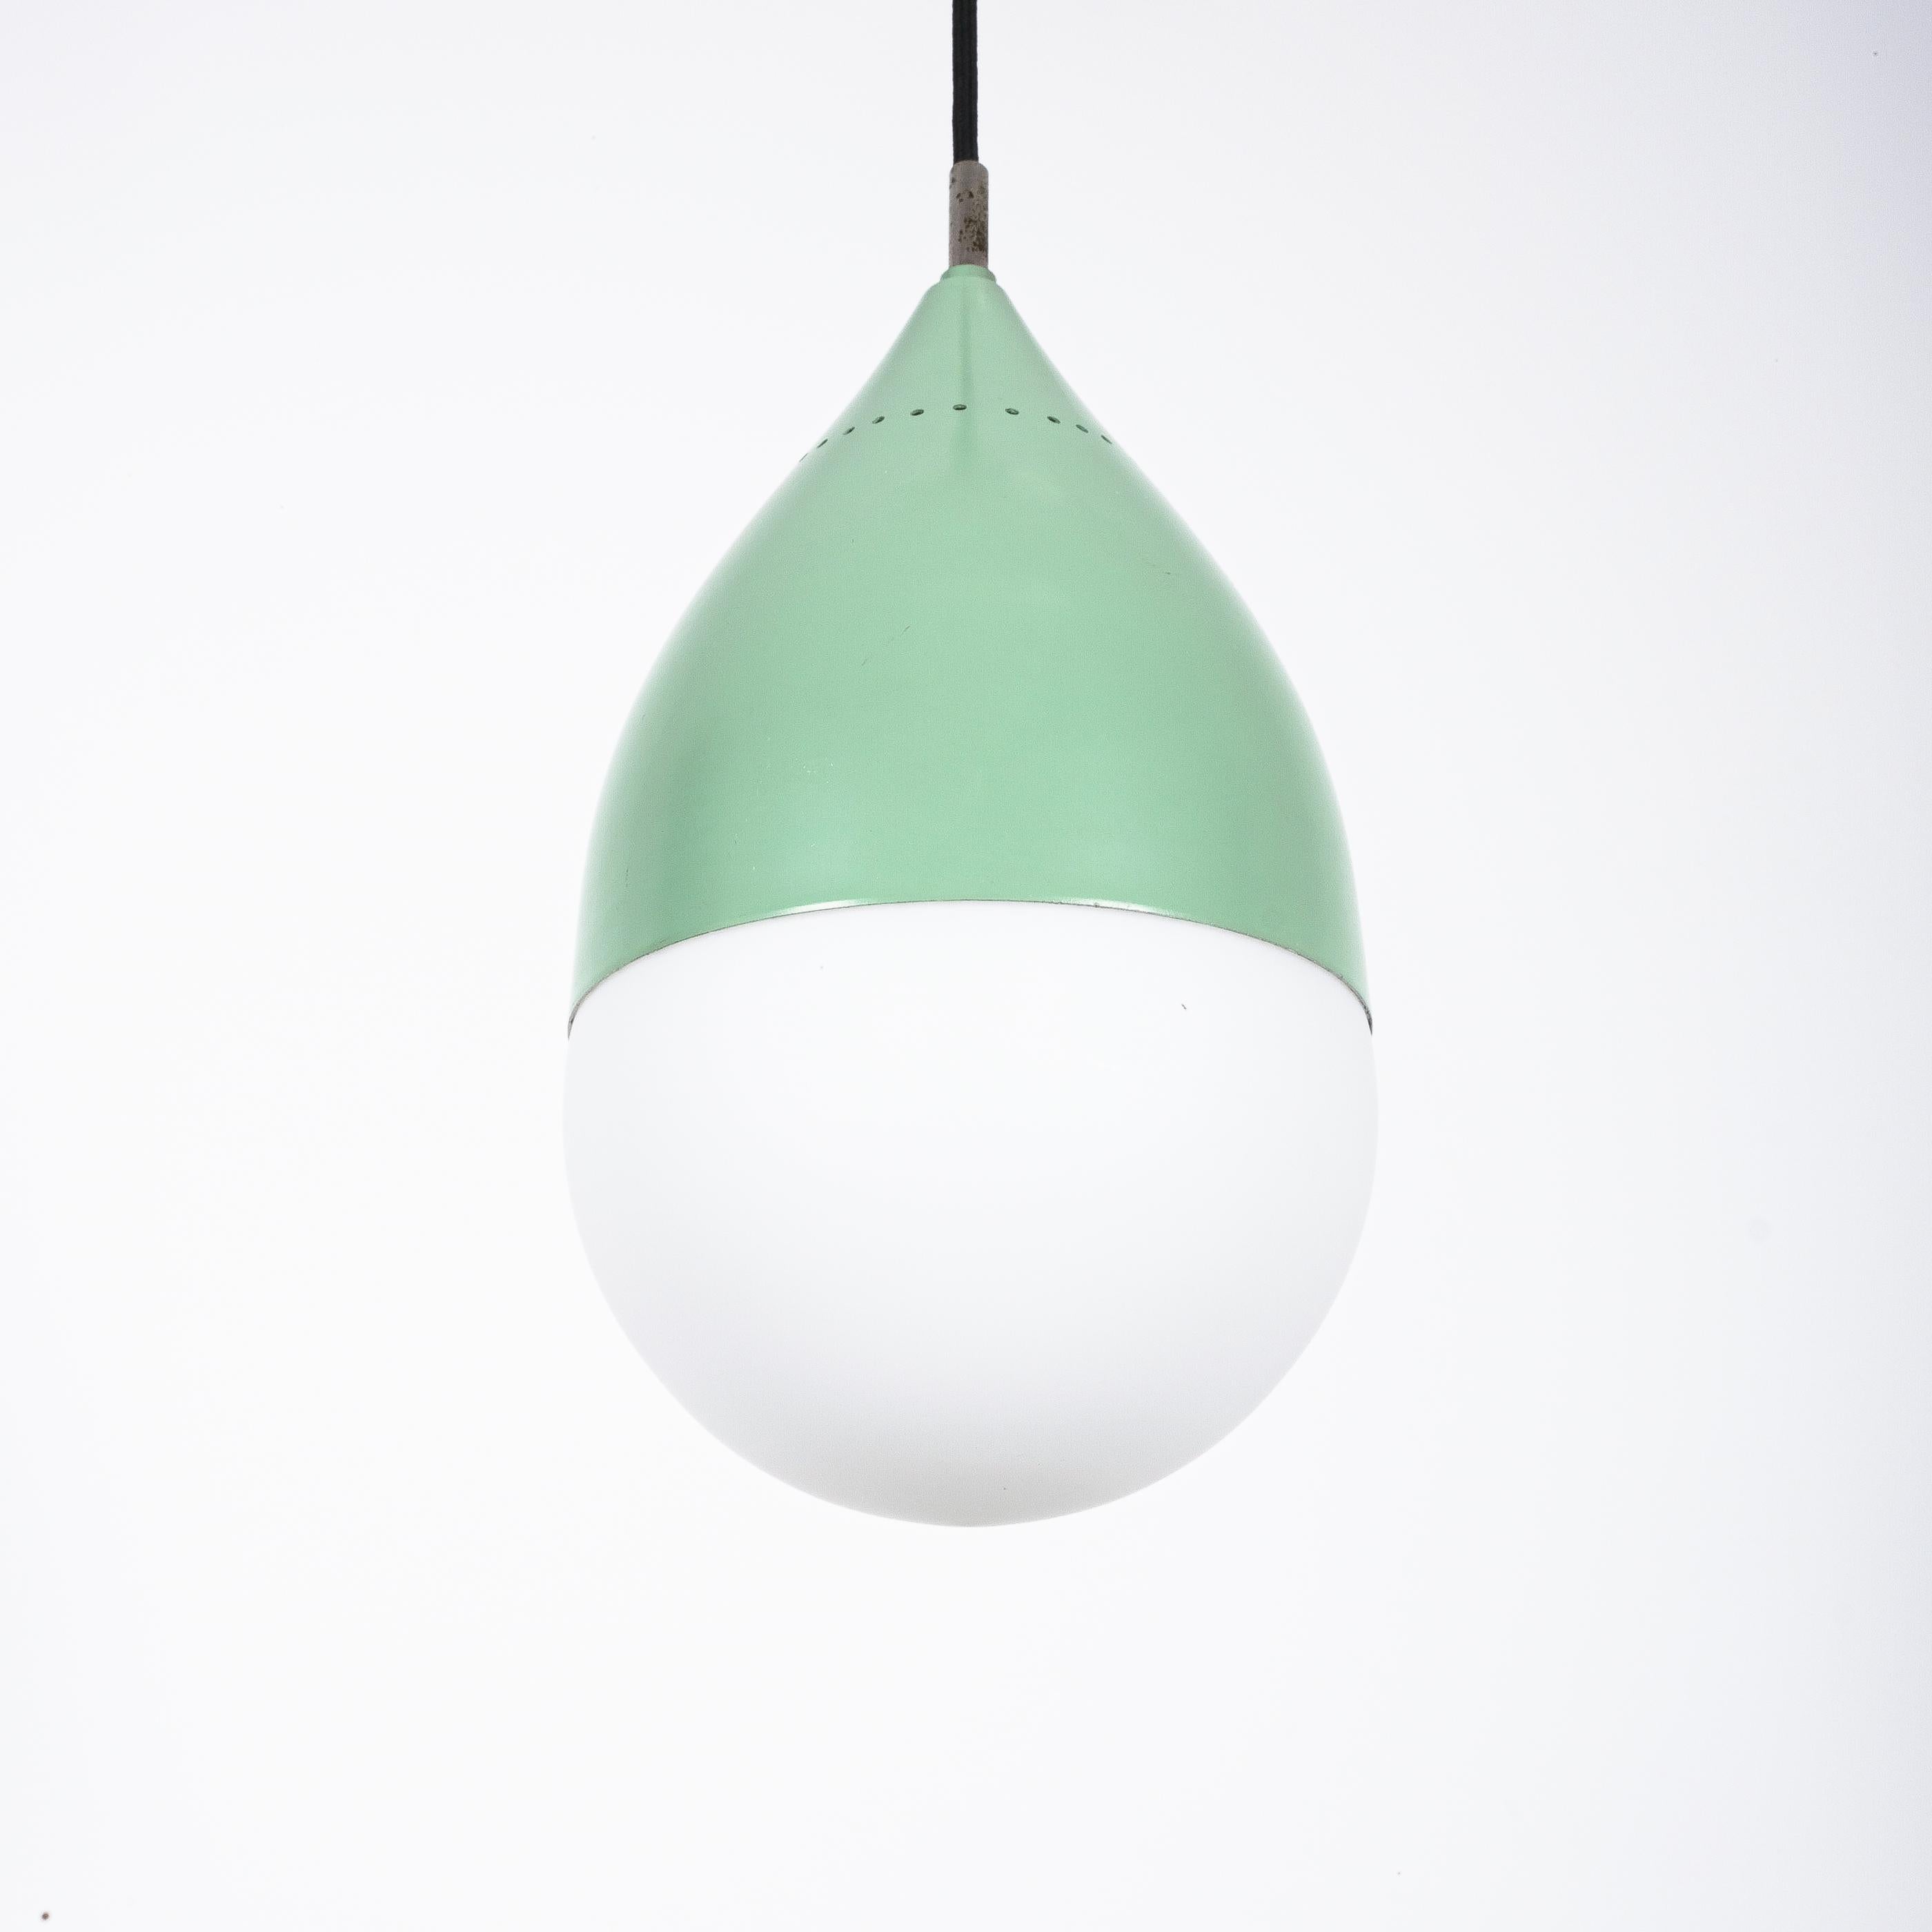 Stilnovo pear-shaped ball pendant satin glass, Italy, circa 1950

Celeste green suspension light by the Italian brand Stilnovo. Beautiful pendant light with a lacquered trumpet-shaped aluminum head. It's in good to very good condition, some little